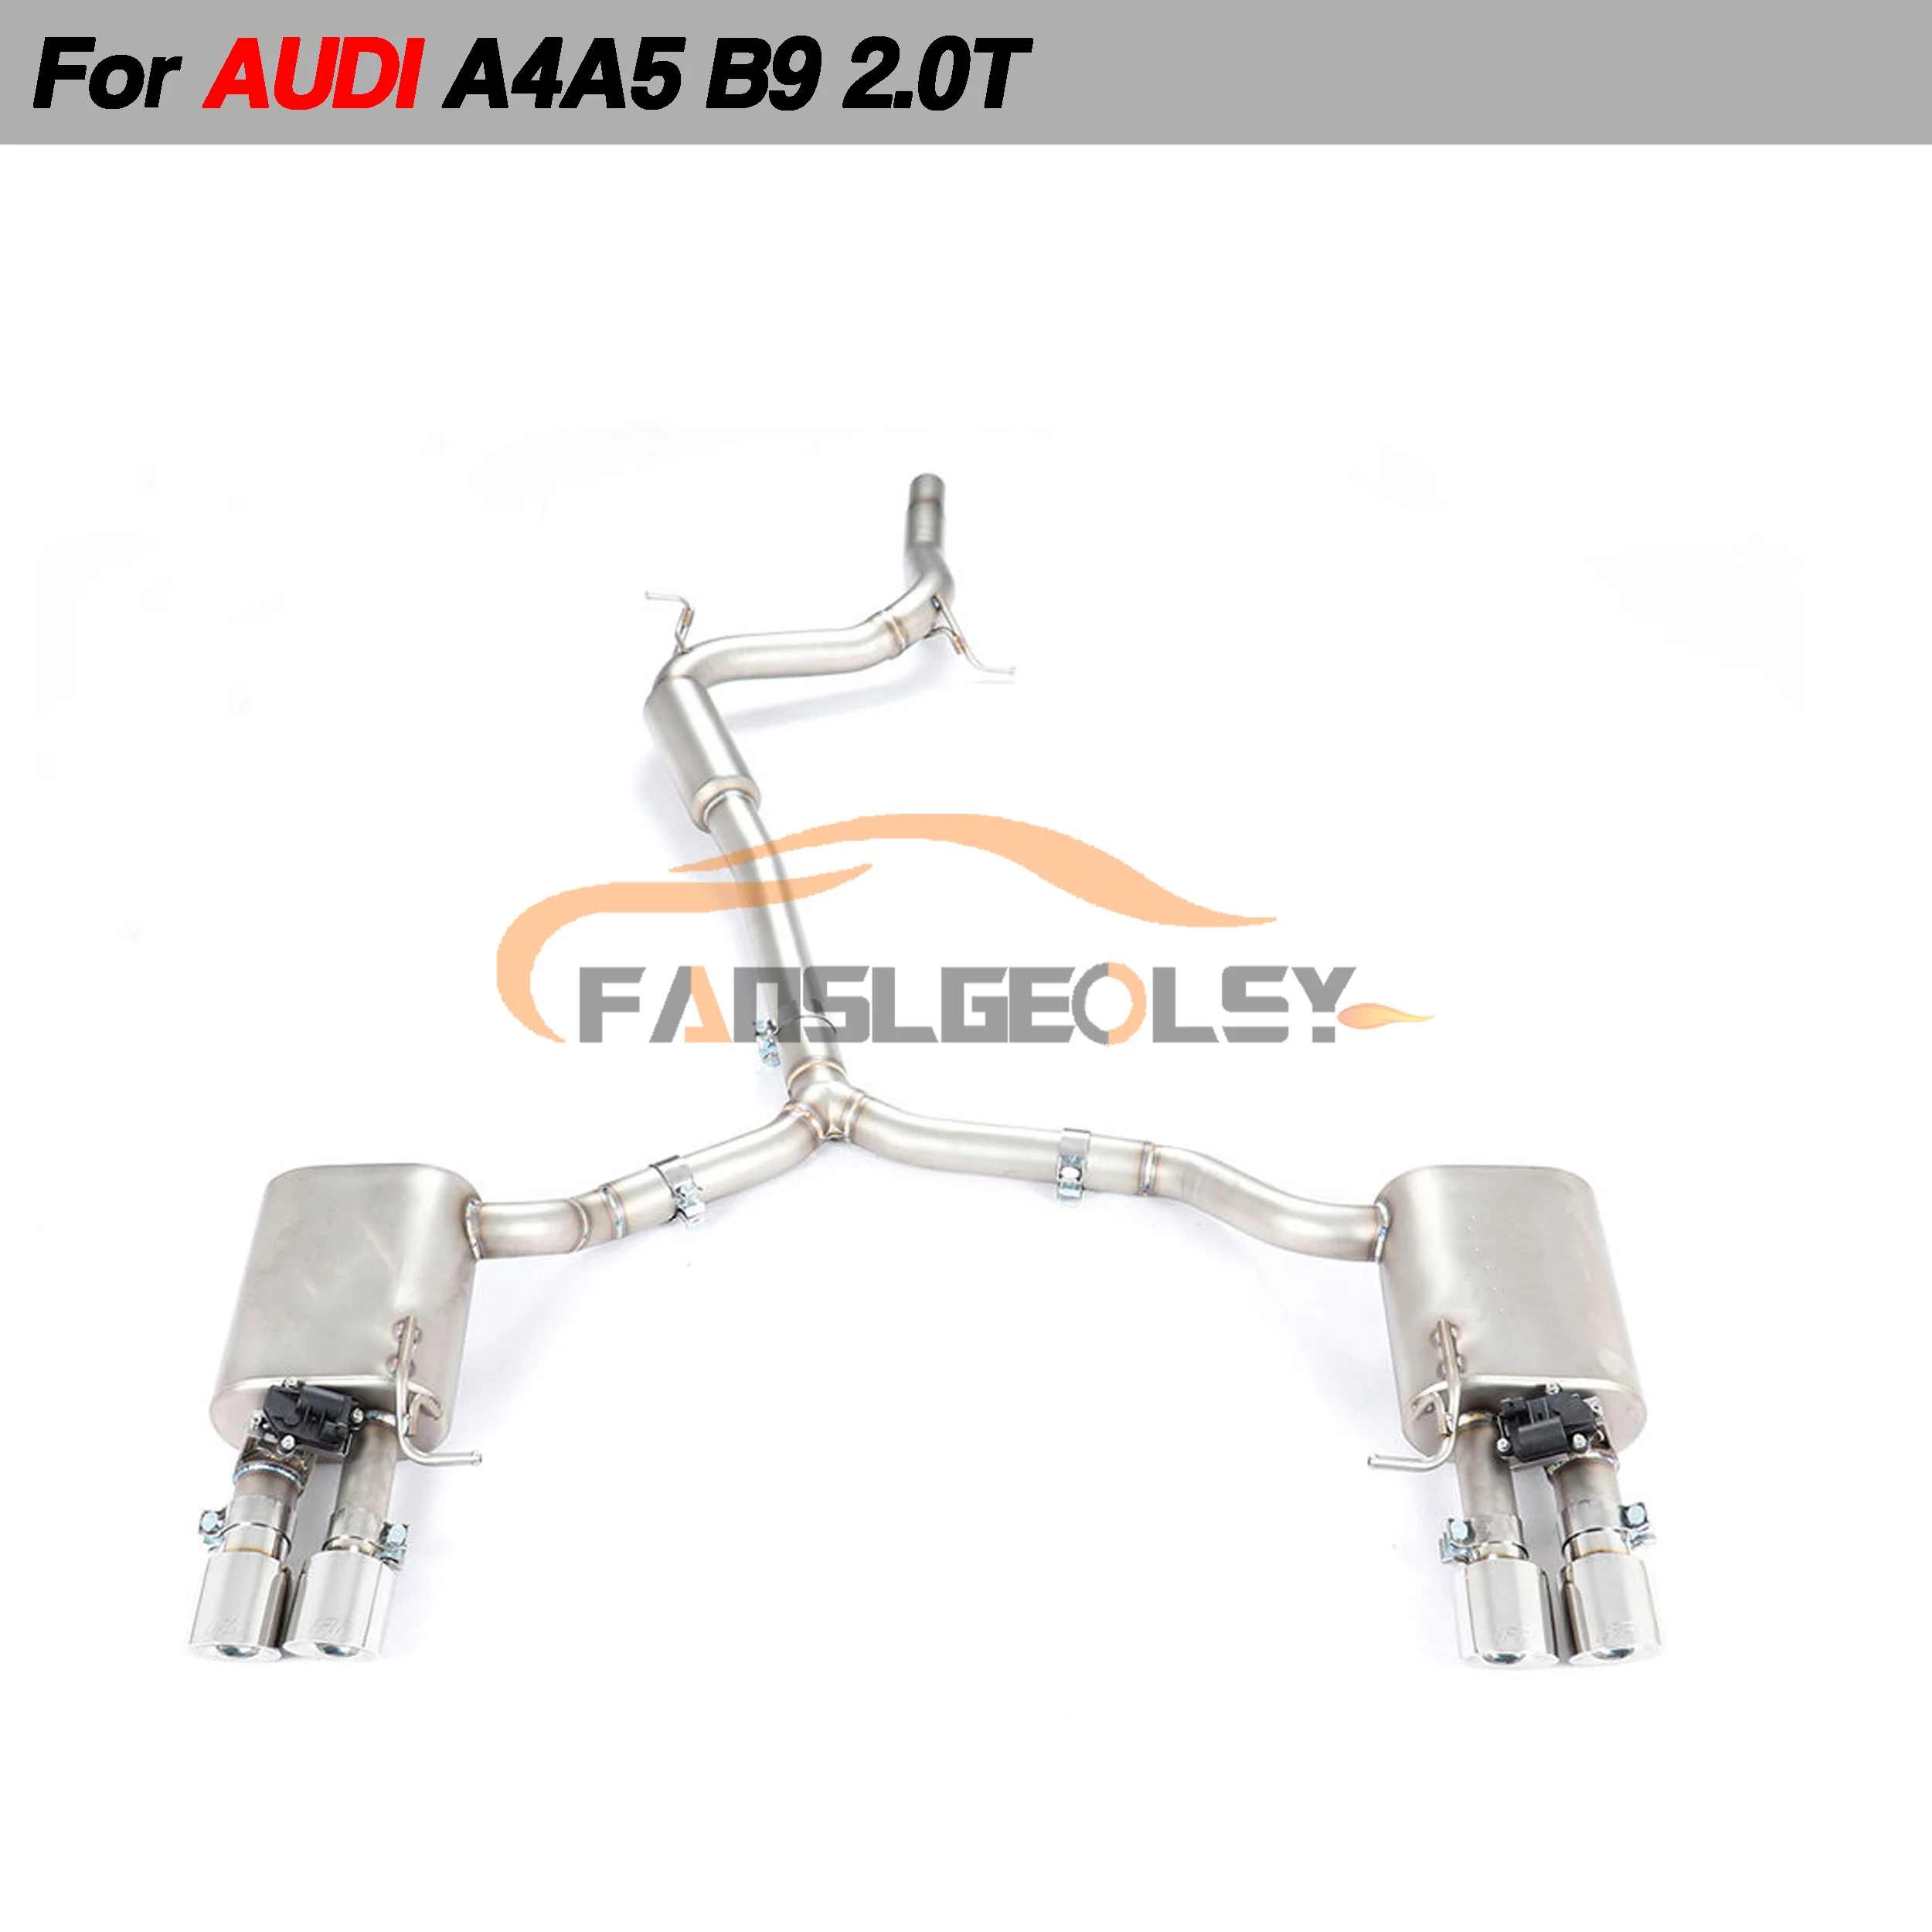 

For Audi A4 A5 B9 2.0T Steel Catback Performance Exhaust System Valve With Muffler Pipes Tuning exhaust assembly